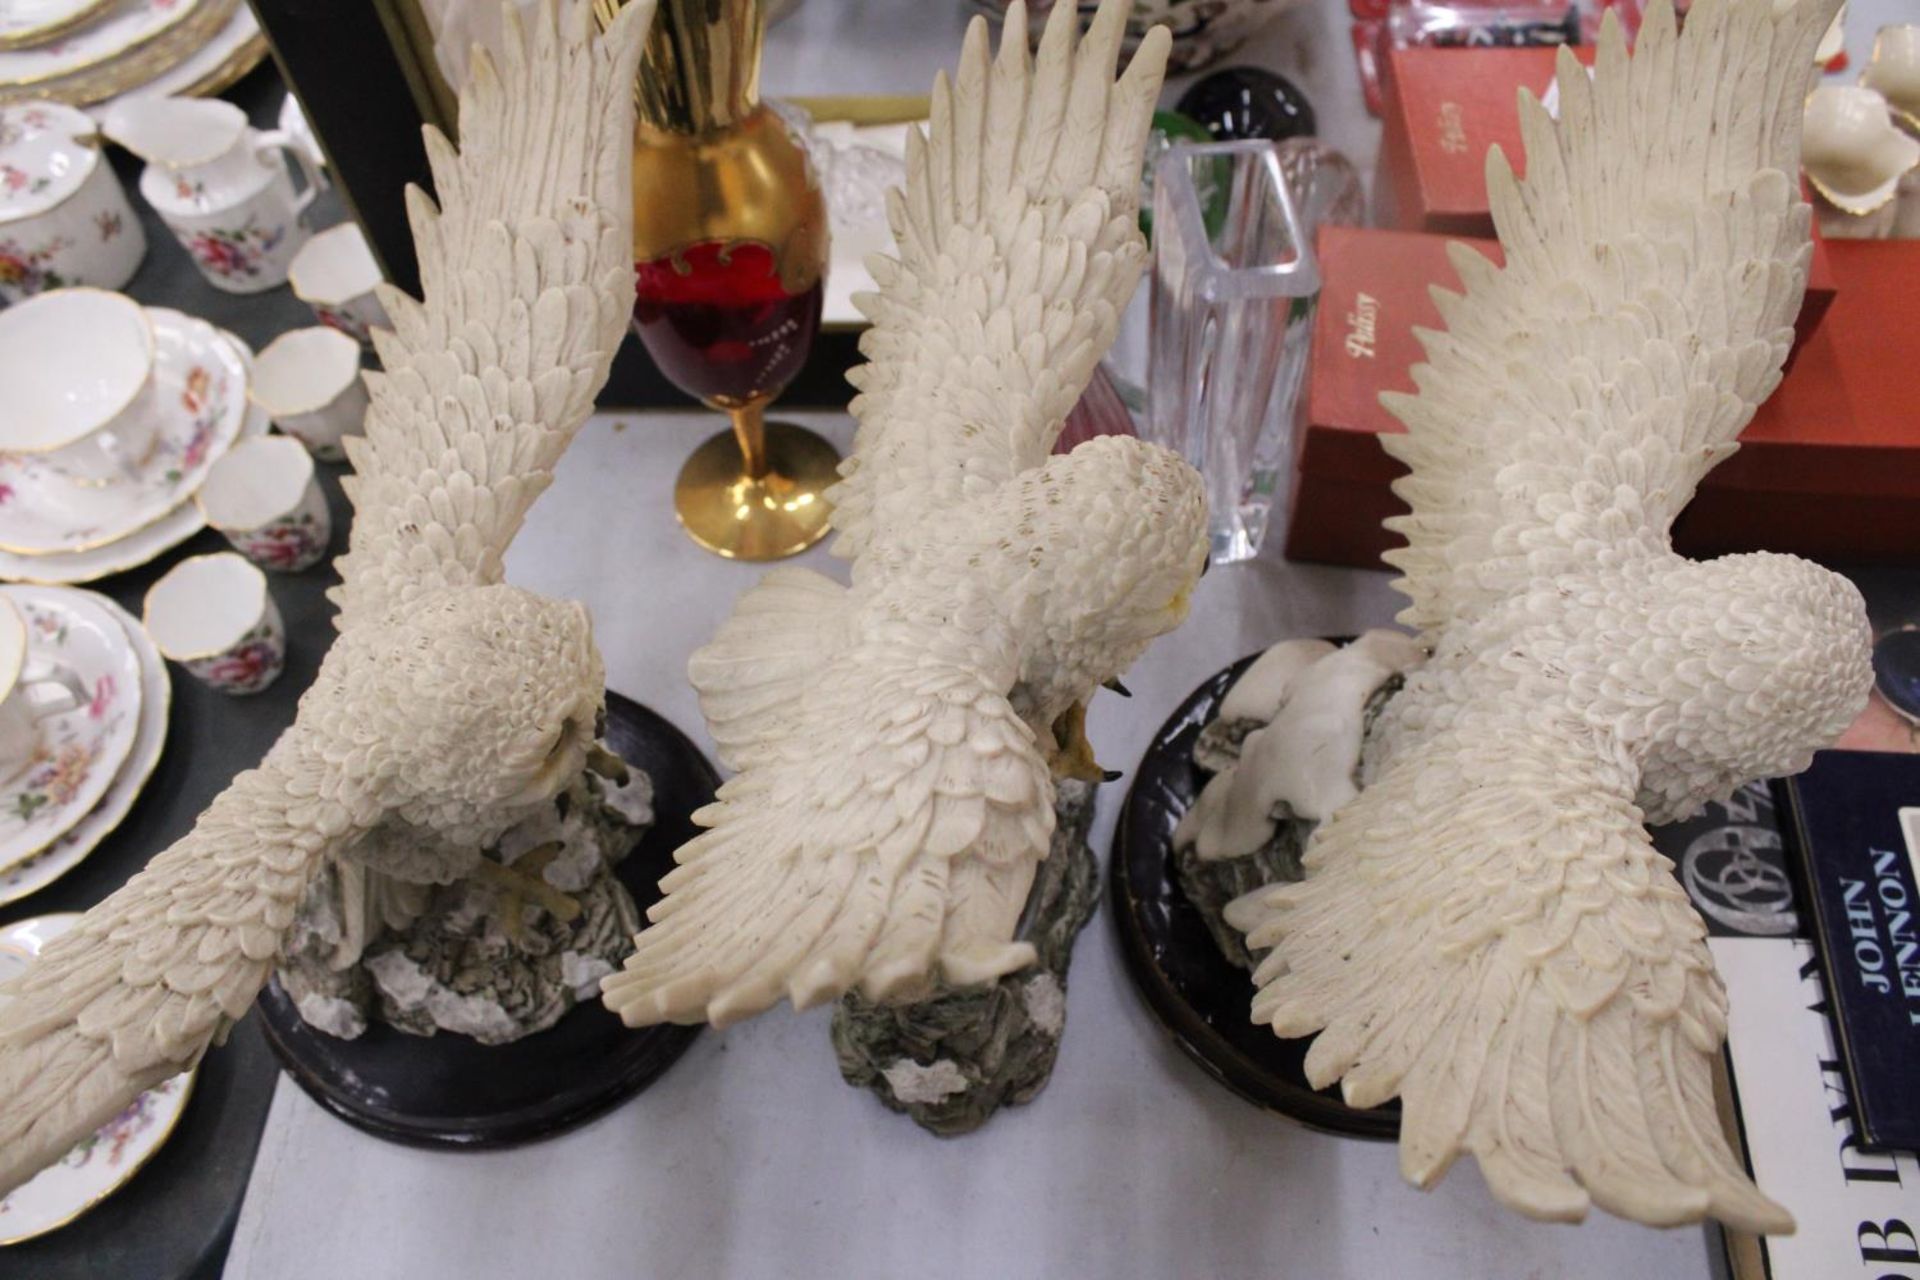 THREE LARGE RESIN 'JULIANA' MODELS OF OWLS TO INCLUDE A CLOCK - Image 5 of 5